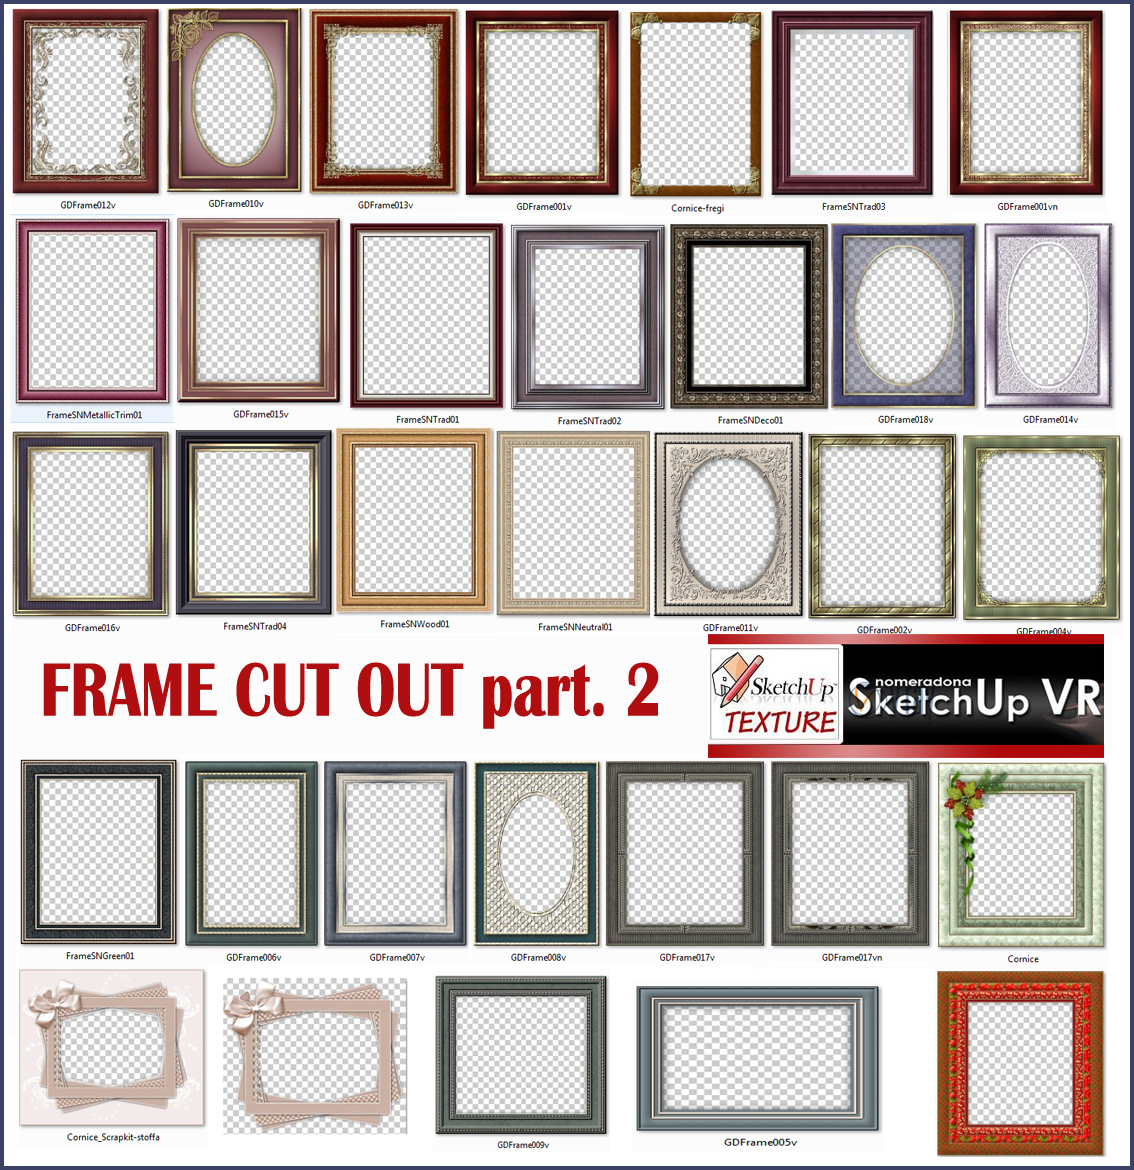 SKETCHUP TEXTURE: FRAME CUT OUT part 2